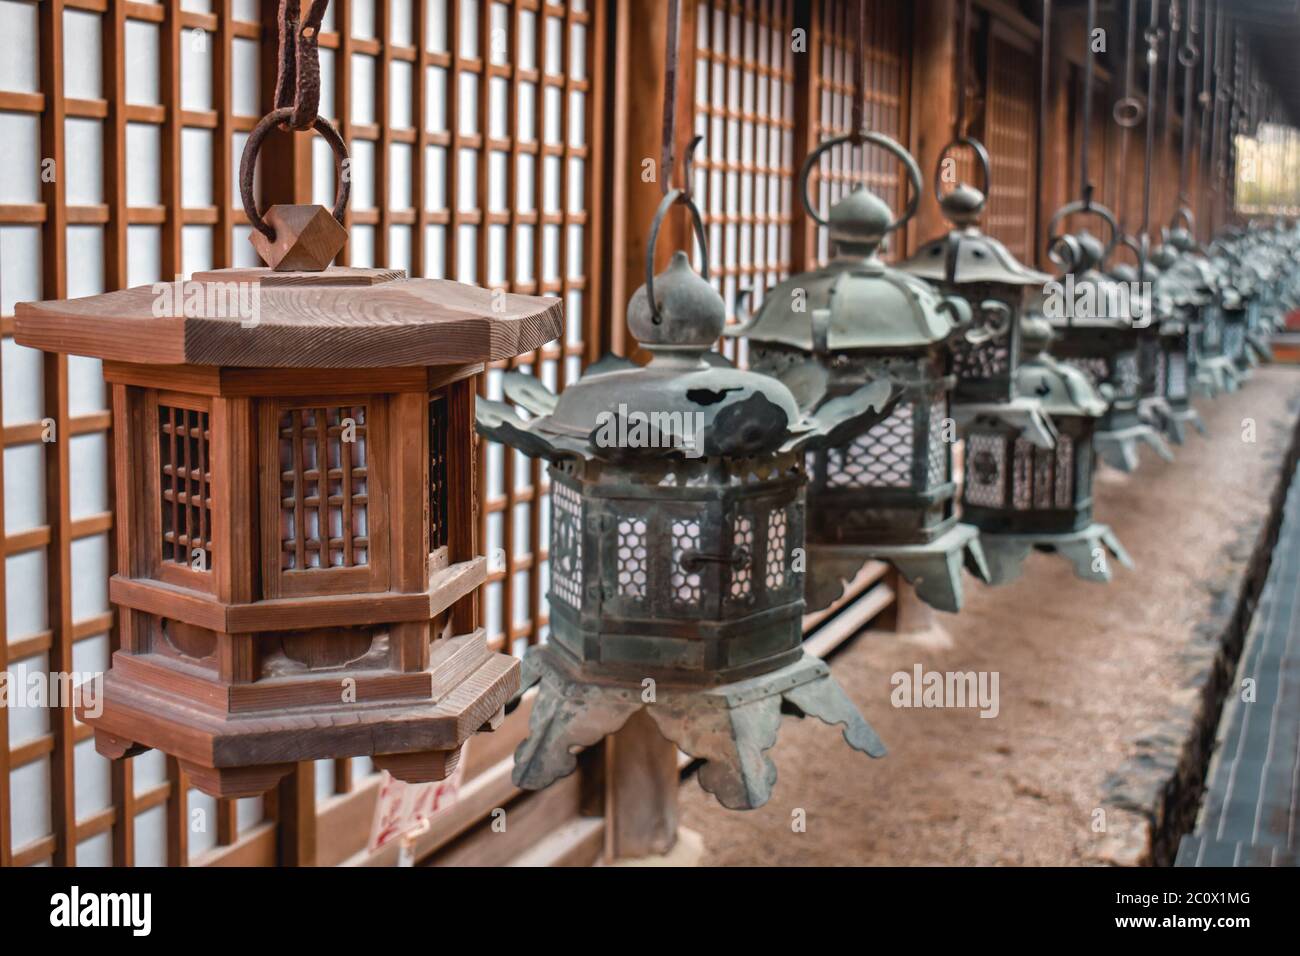 Line of traditional Japanese iron lamps in Nara Japan Stock Photo